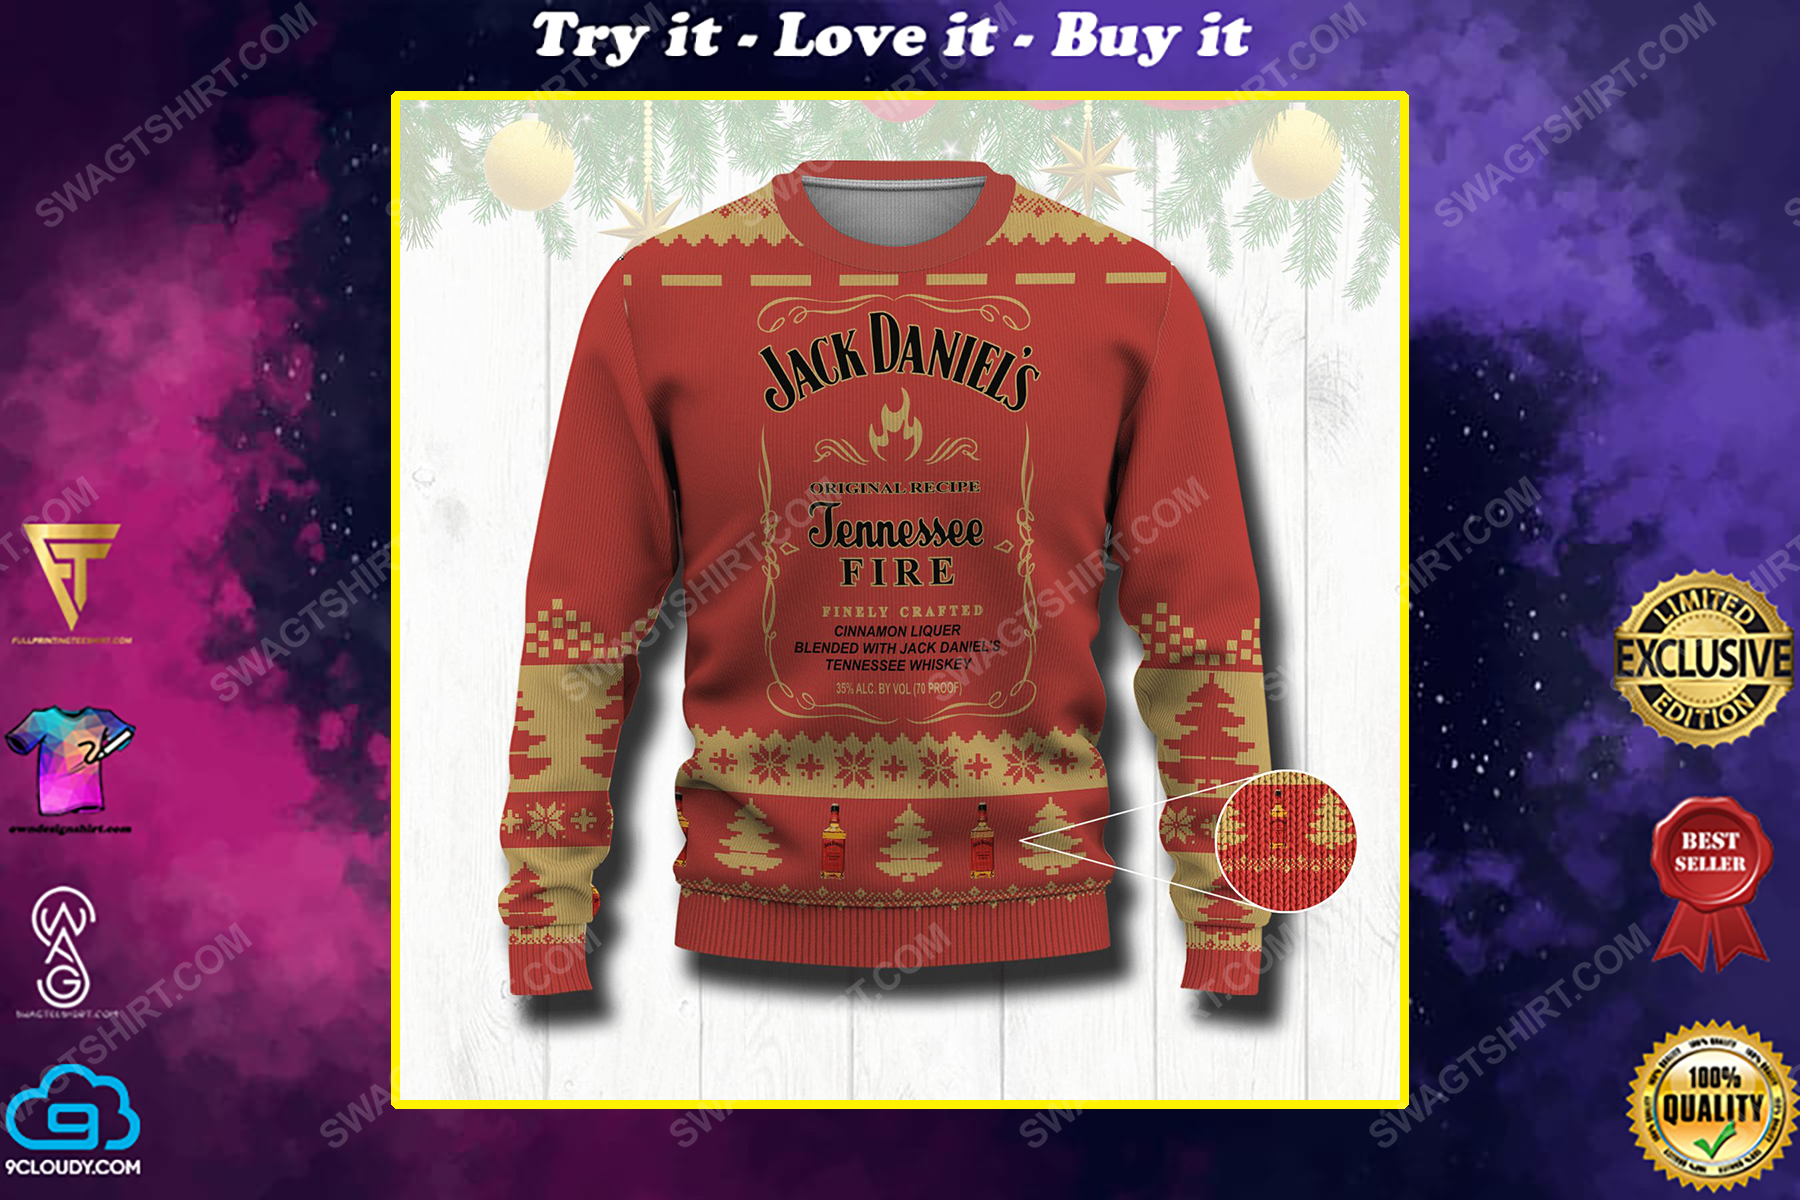 Jack daniels original recipe tennessee fire ugly christmas sweater